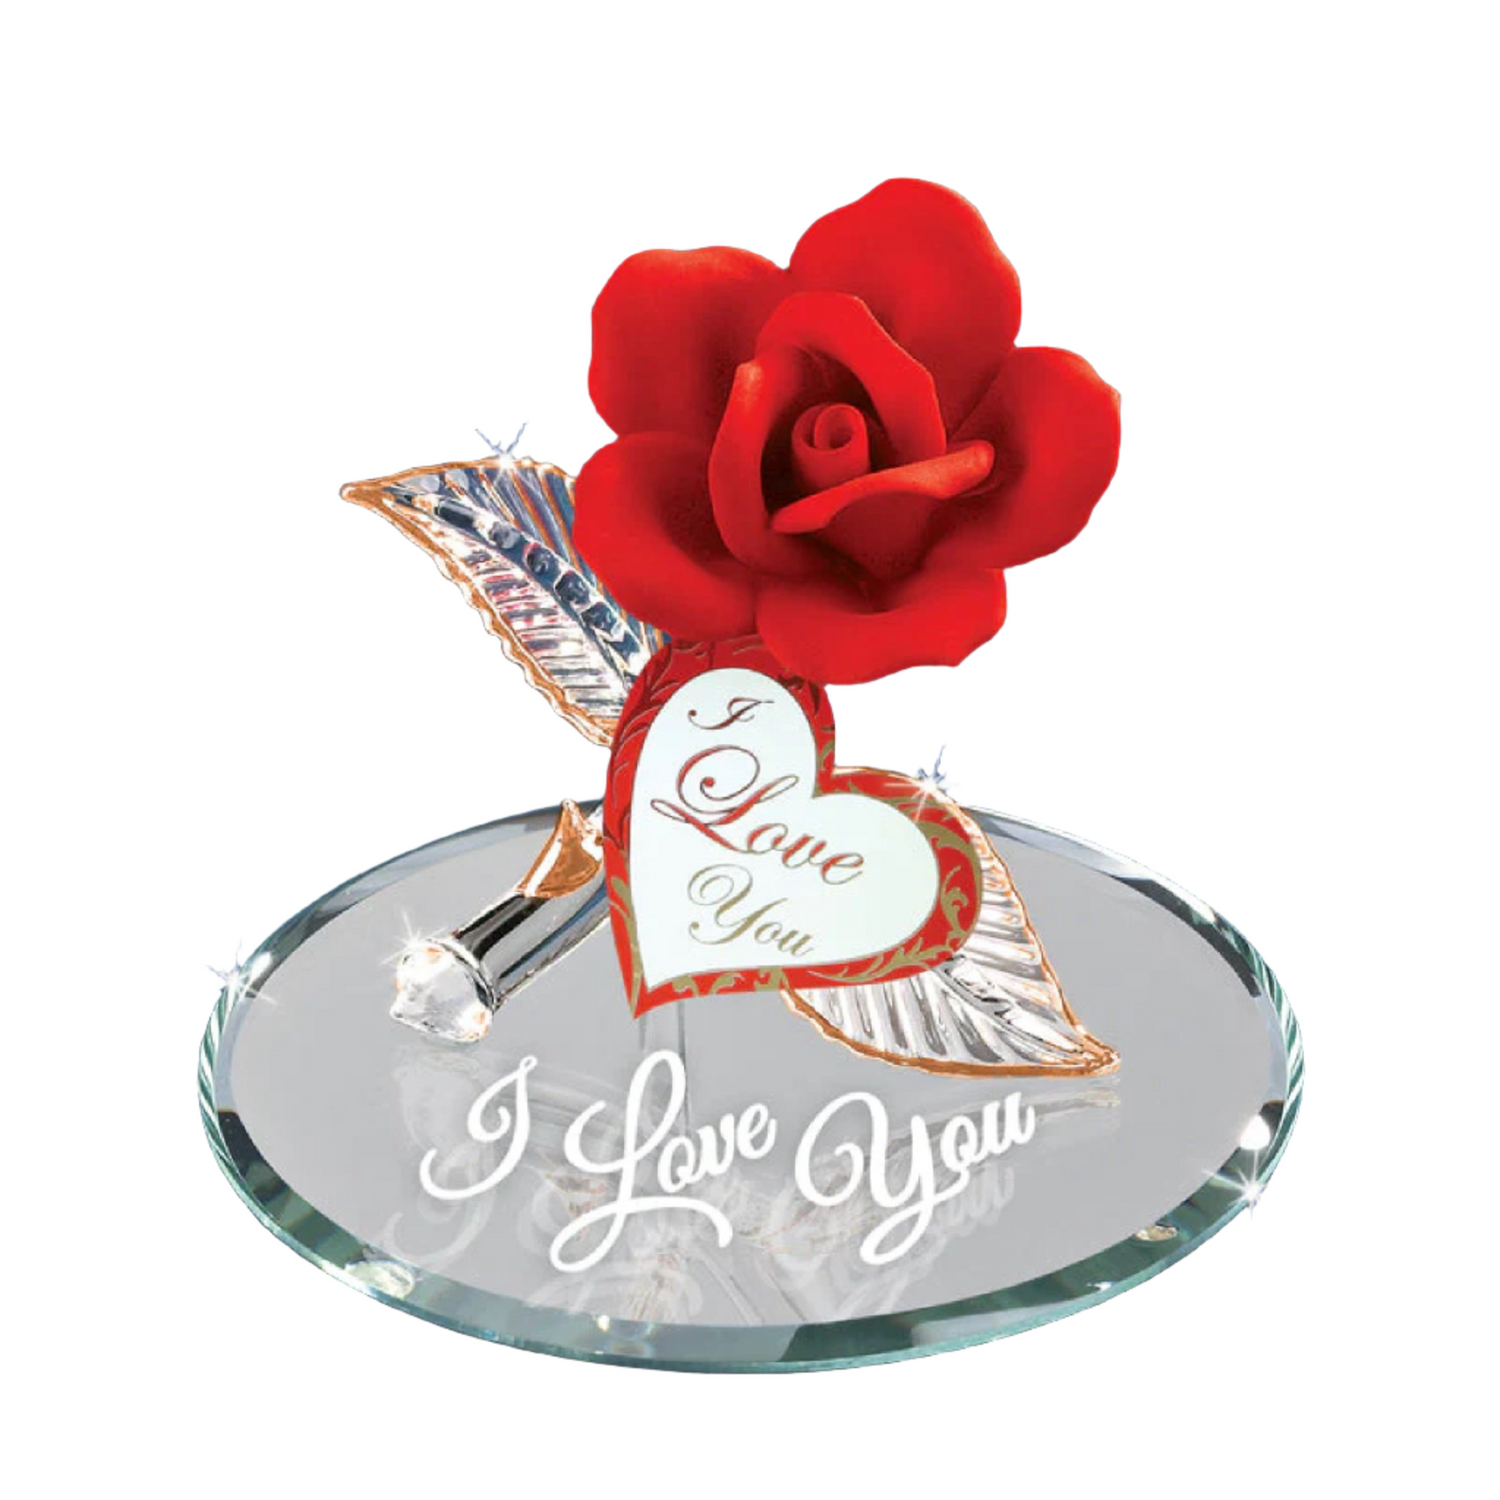 Glass Baron "I Love You" Red Rose on Mirror Figurine